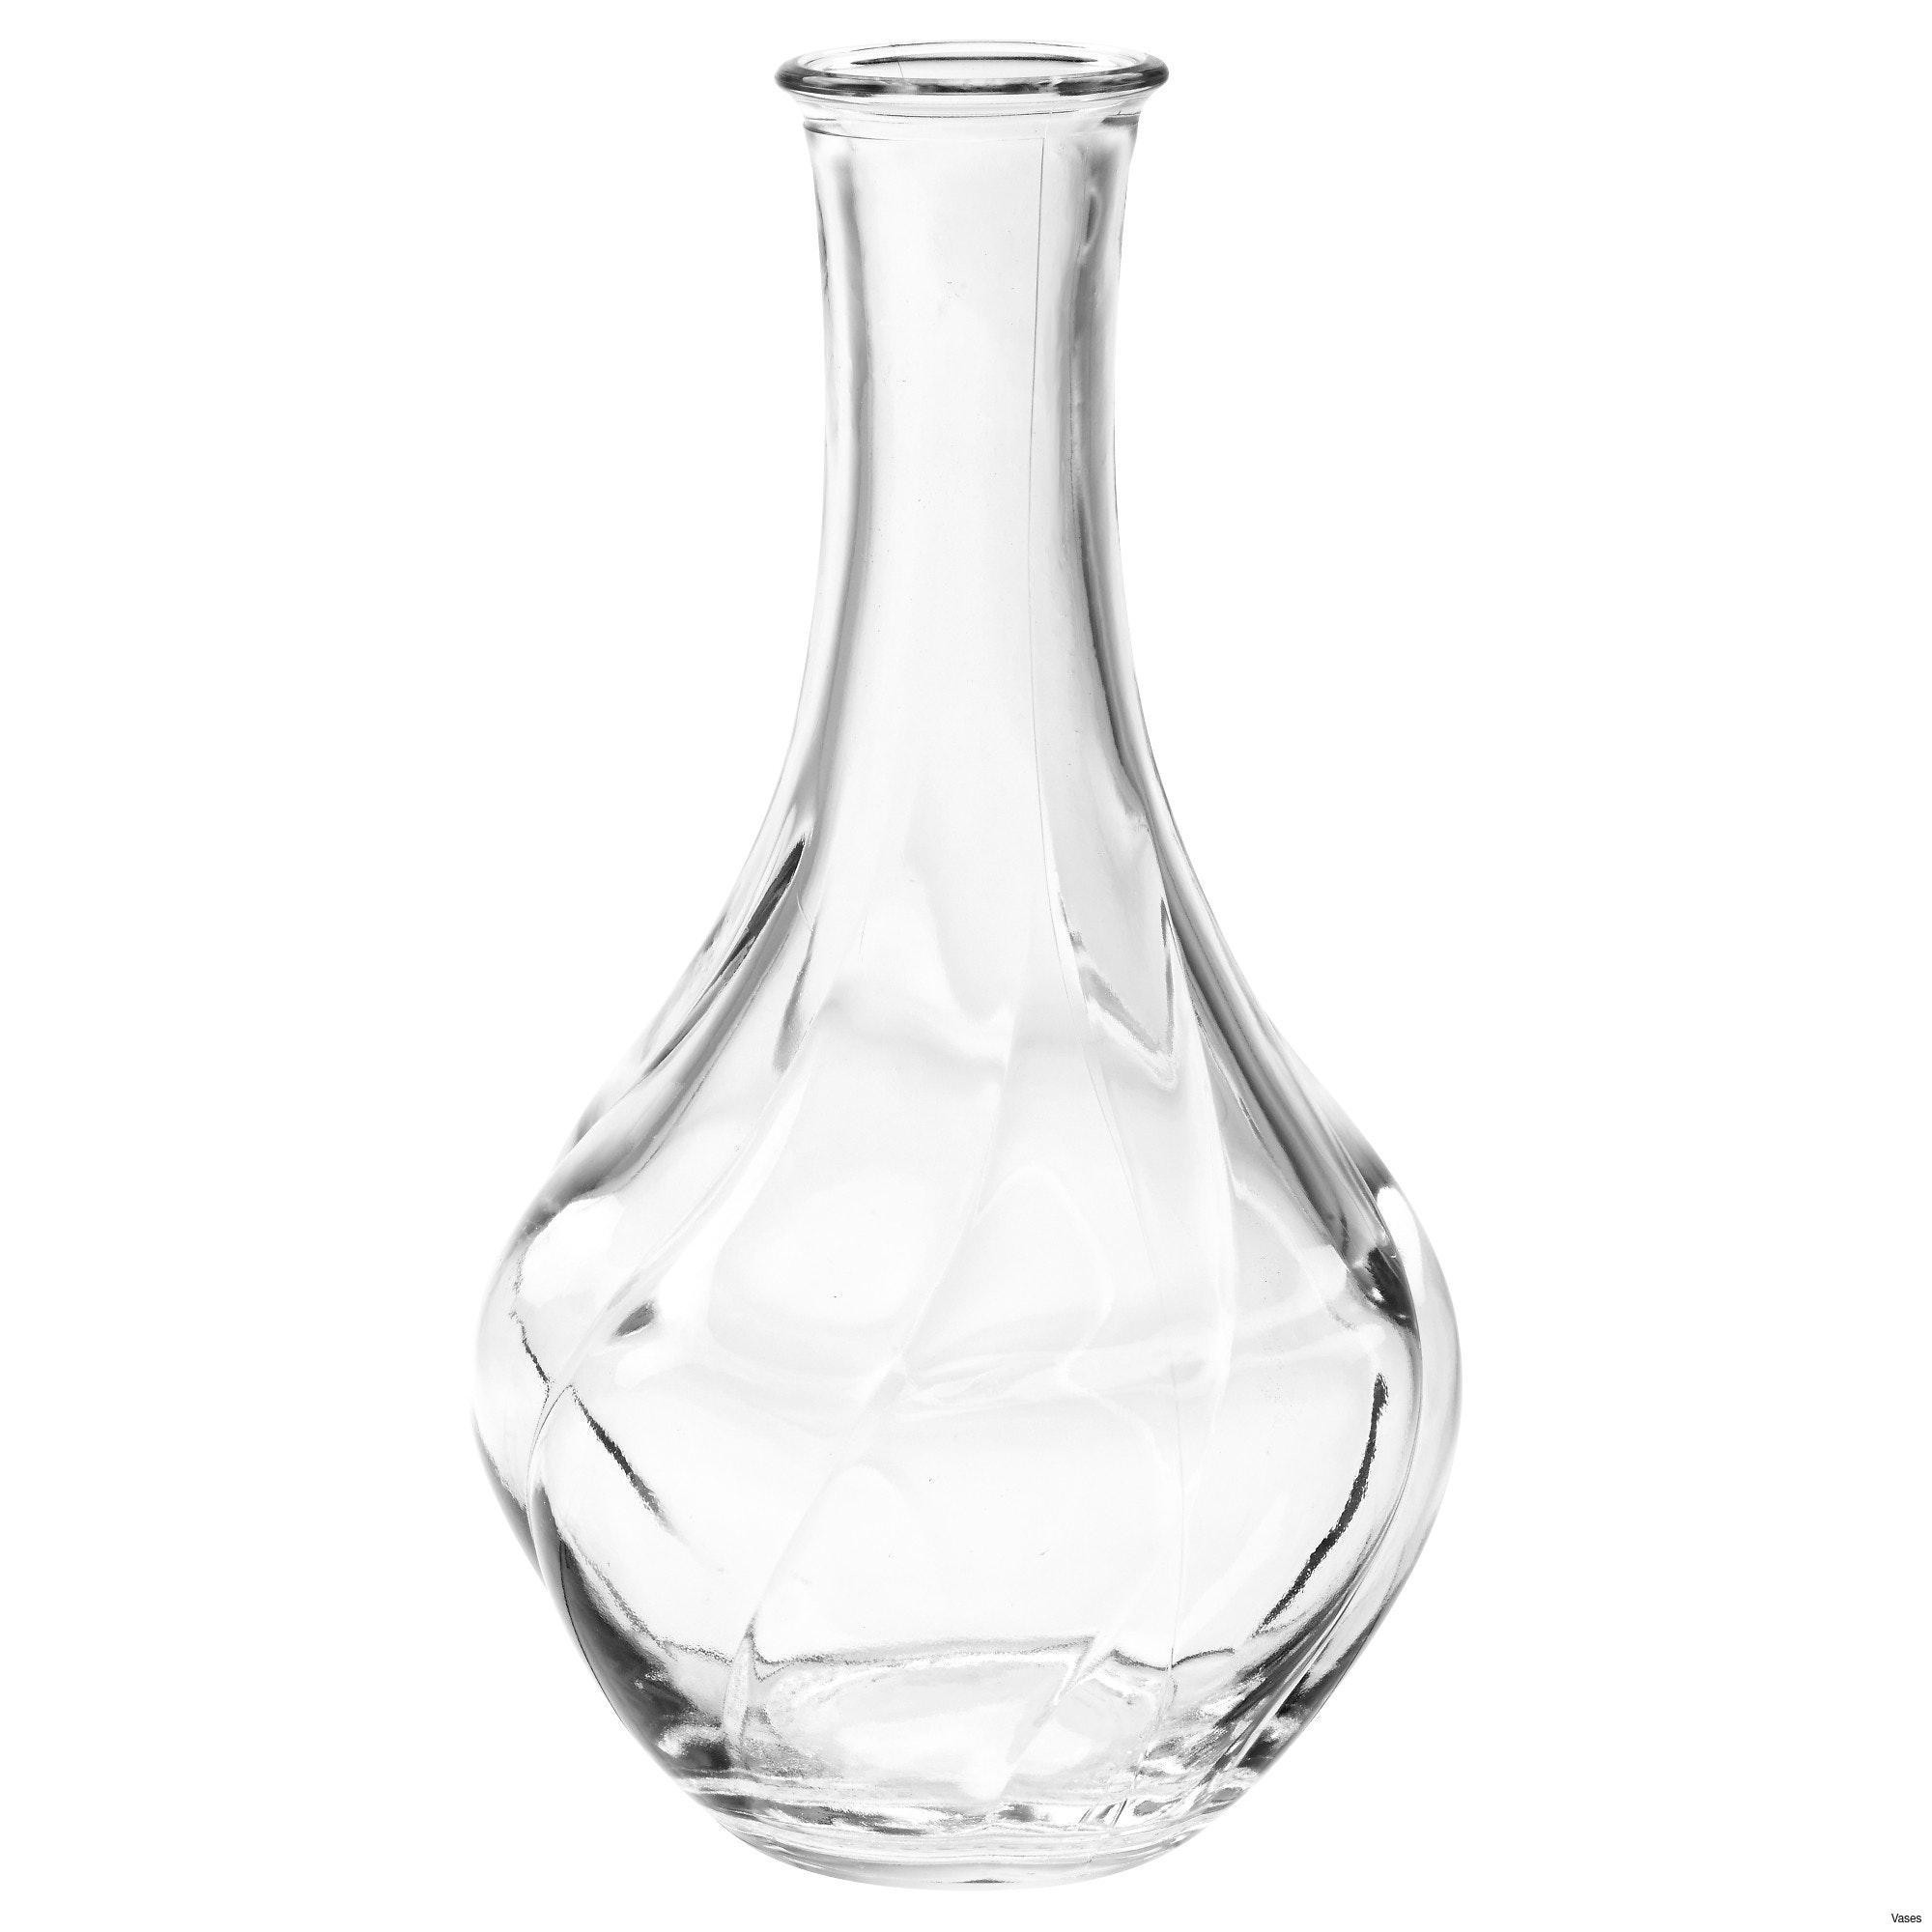 16 Stunning Tall Vases for Sale Cheap 2024 free download tall vases for sale cheap of heavy glass vase image living room vases wholesale new h vases big regarding heavy glass vase gallery living room glass vases fresh clear vase 0d tags amazing an